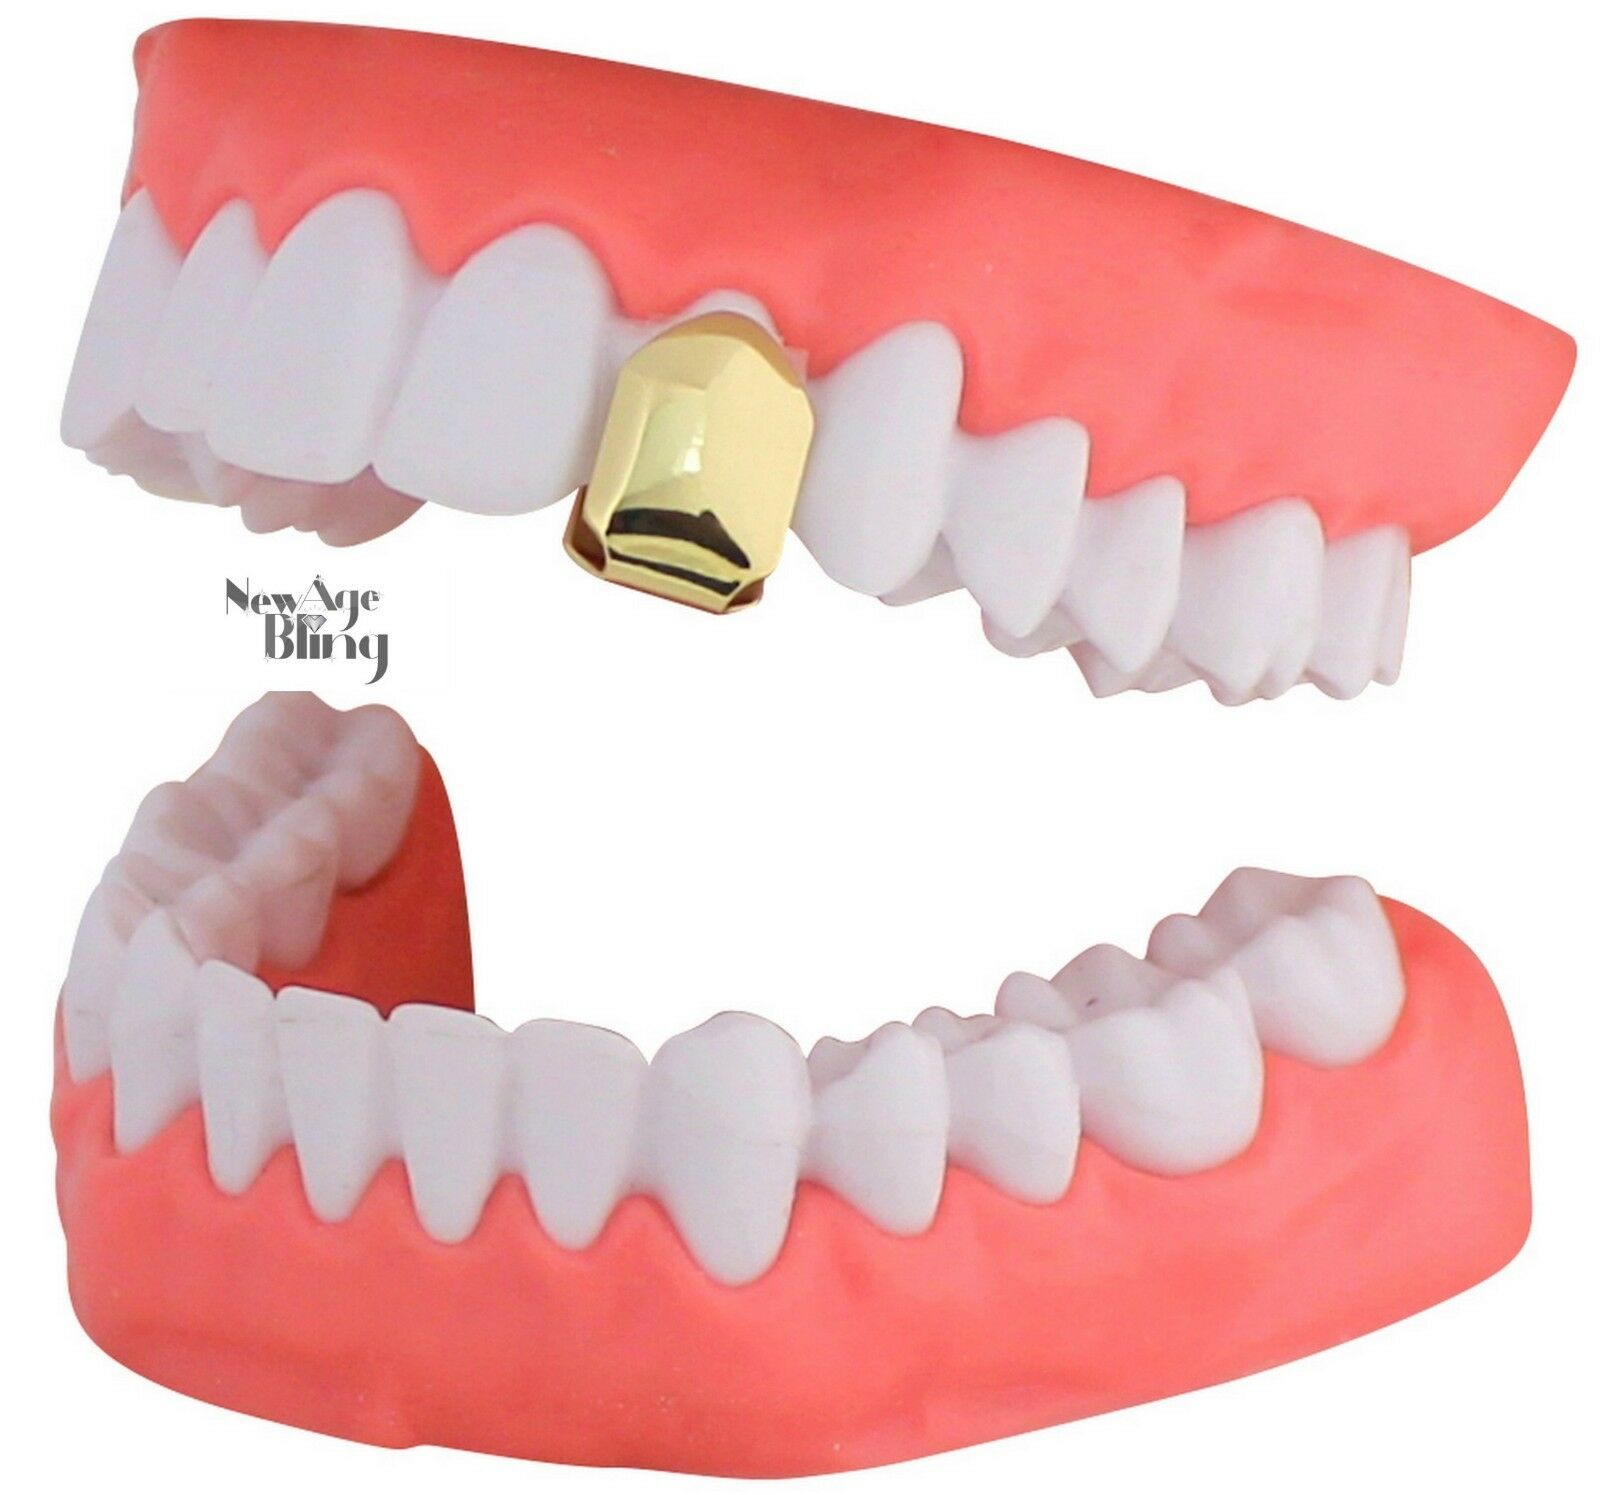 14k Gold Plated Small Single Tooth Cap Grillz Teeth W/mold Hip Hop Grill